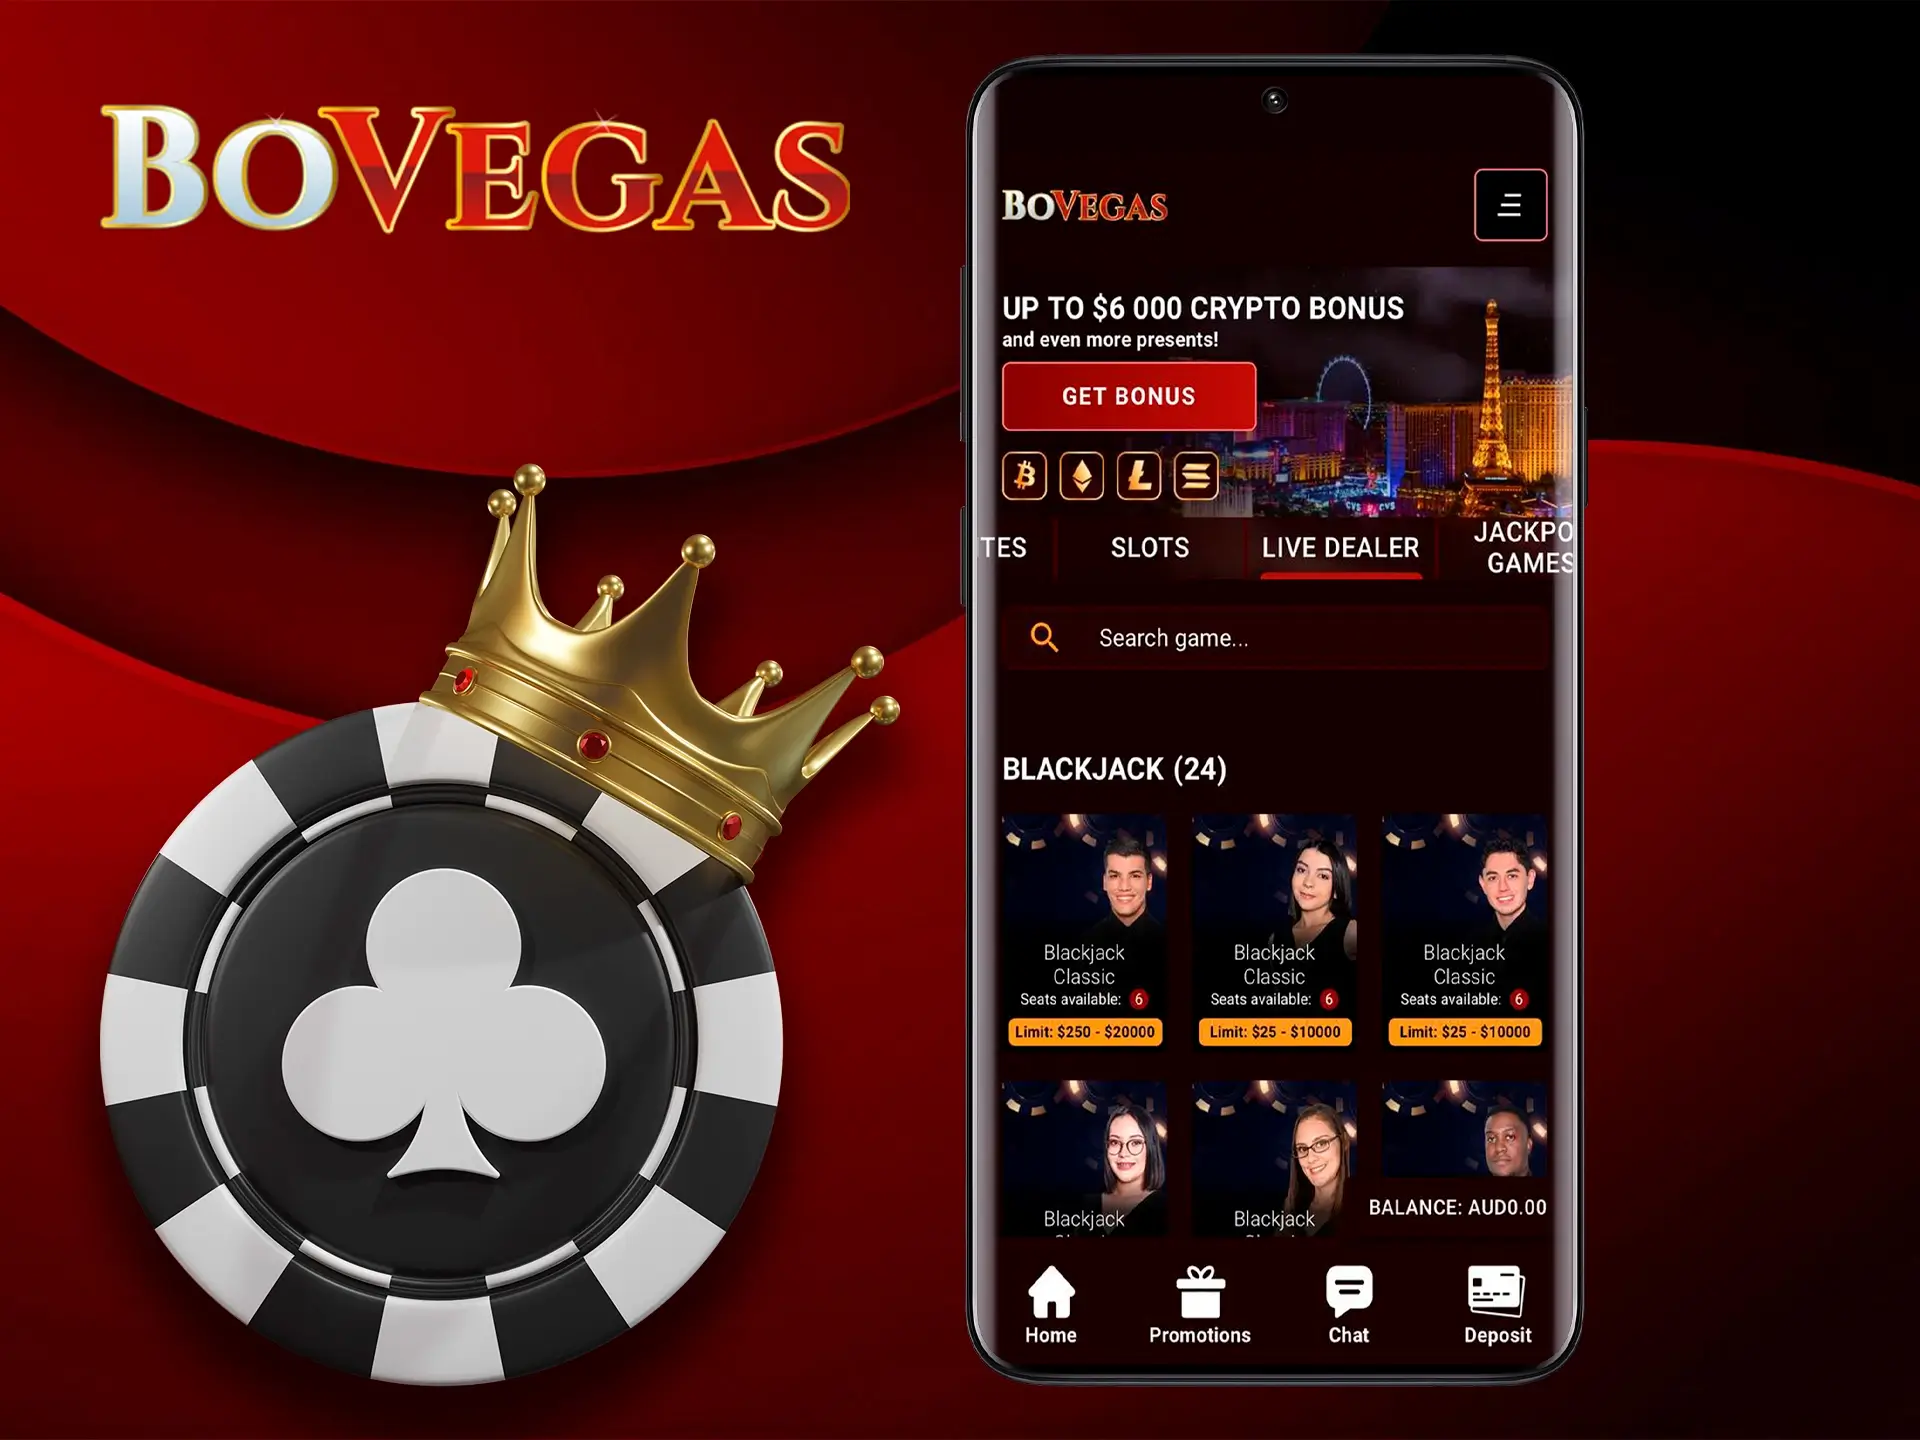 The BoVegas mobile app gives you superior graphics and full access to games with real dealers.